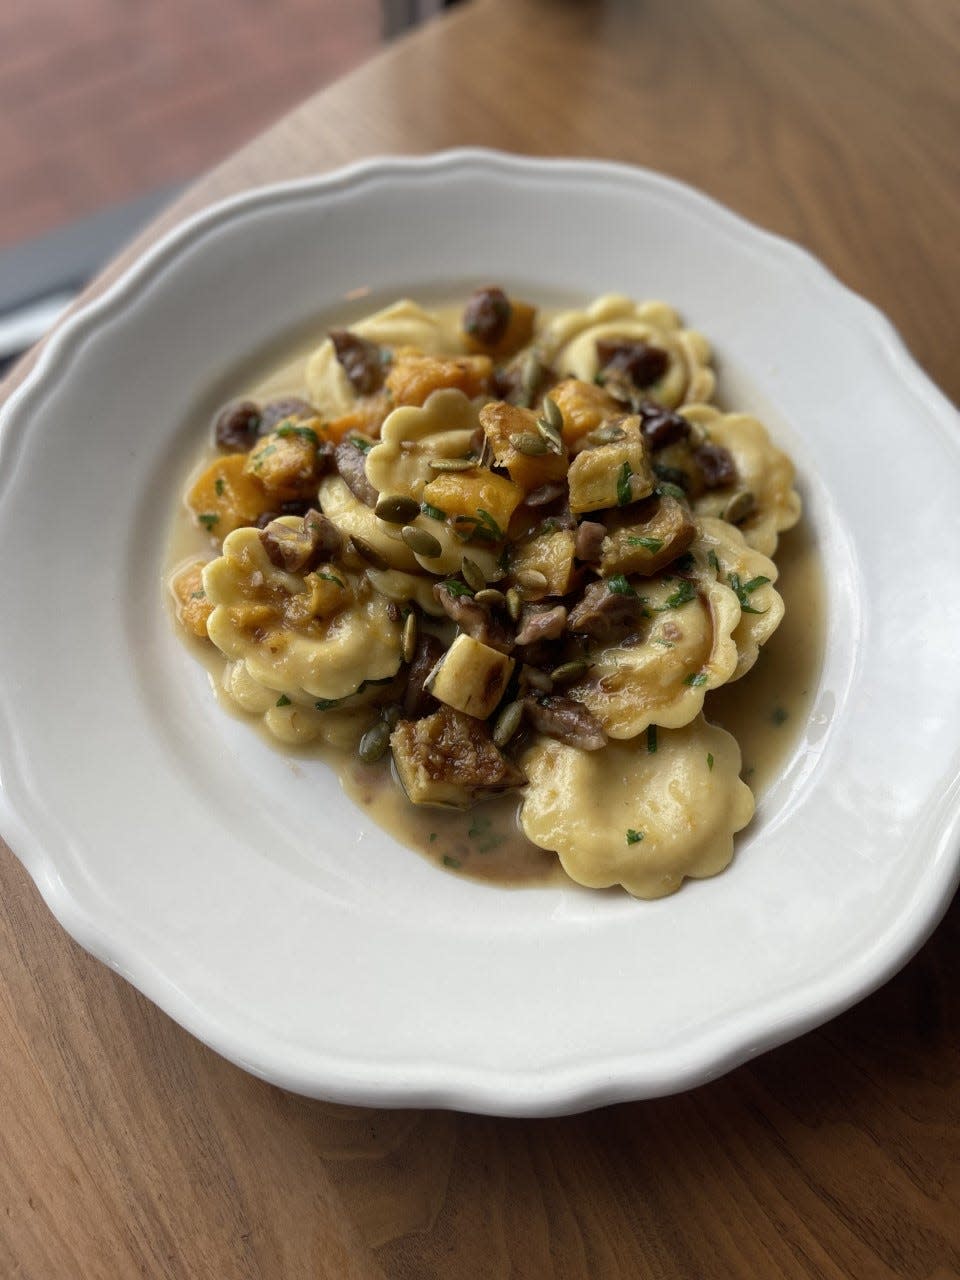 For something a little more fancy, try Novella Osteria's butternut squash ravioli.